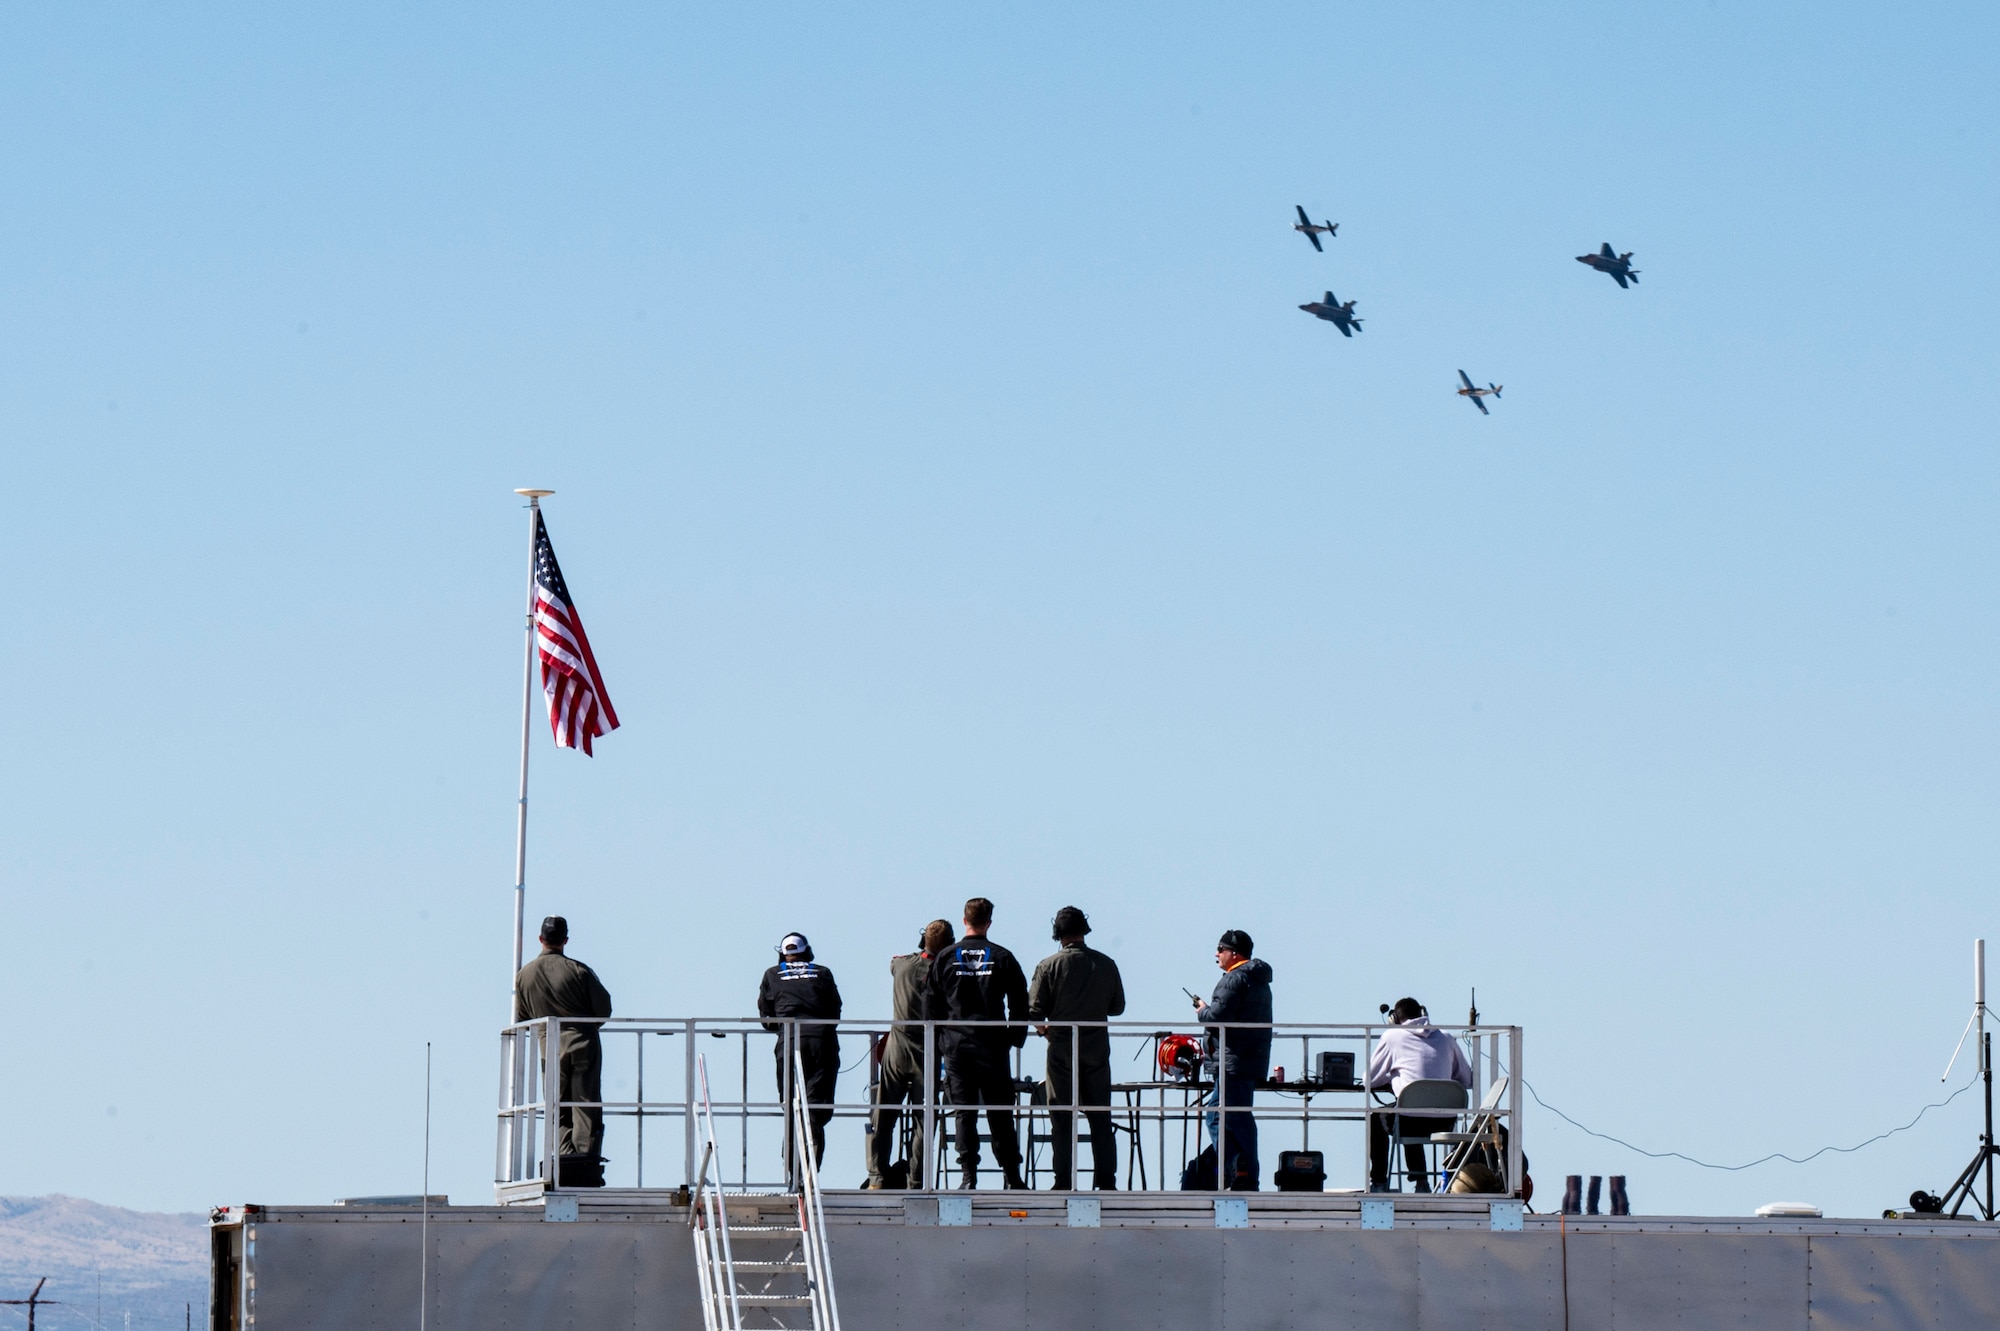 A photo of four aircraft flying in a formation while people watch.